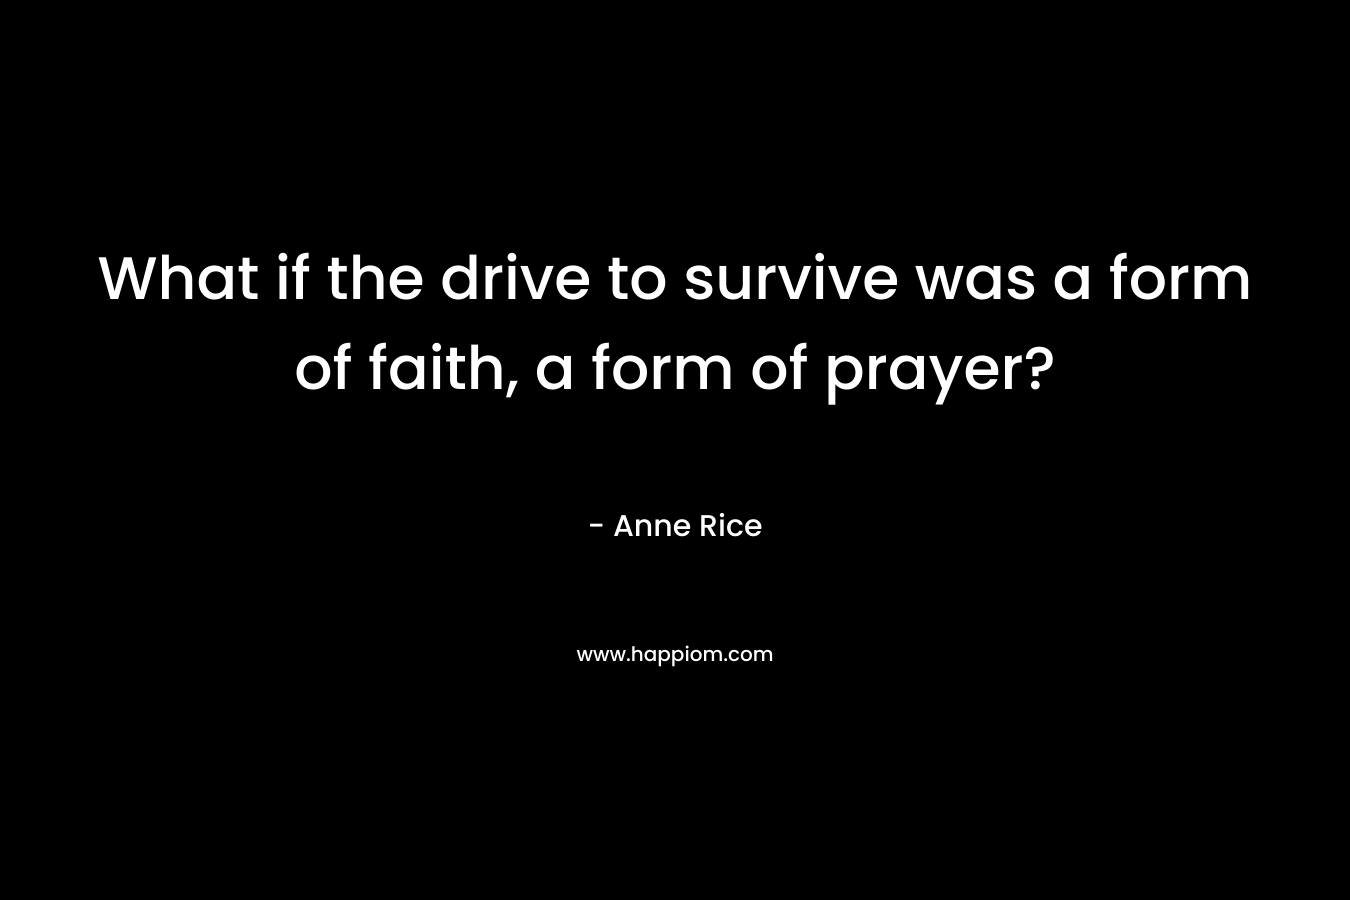 What if the drive to survive was a form of faith, a form of prayer?